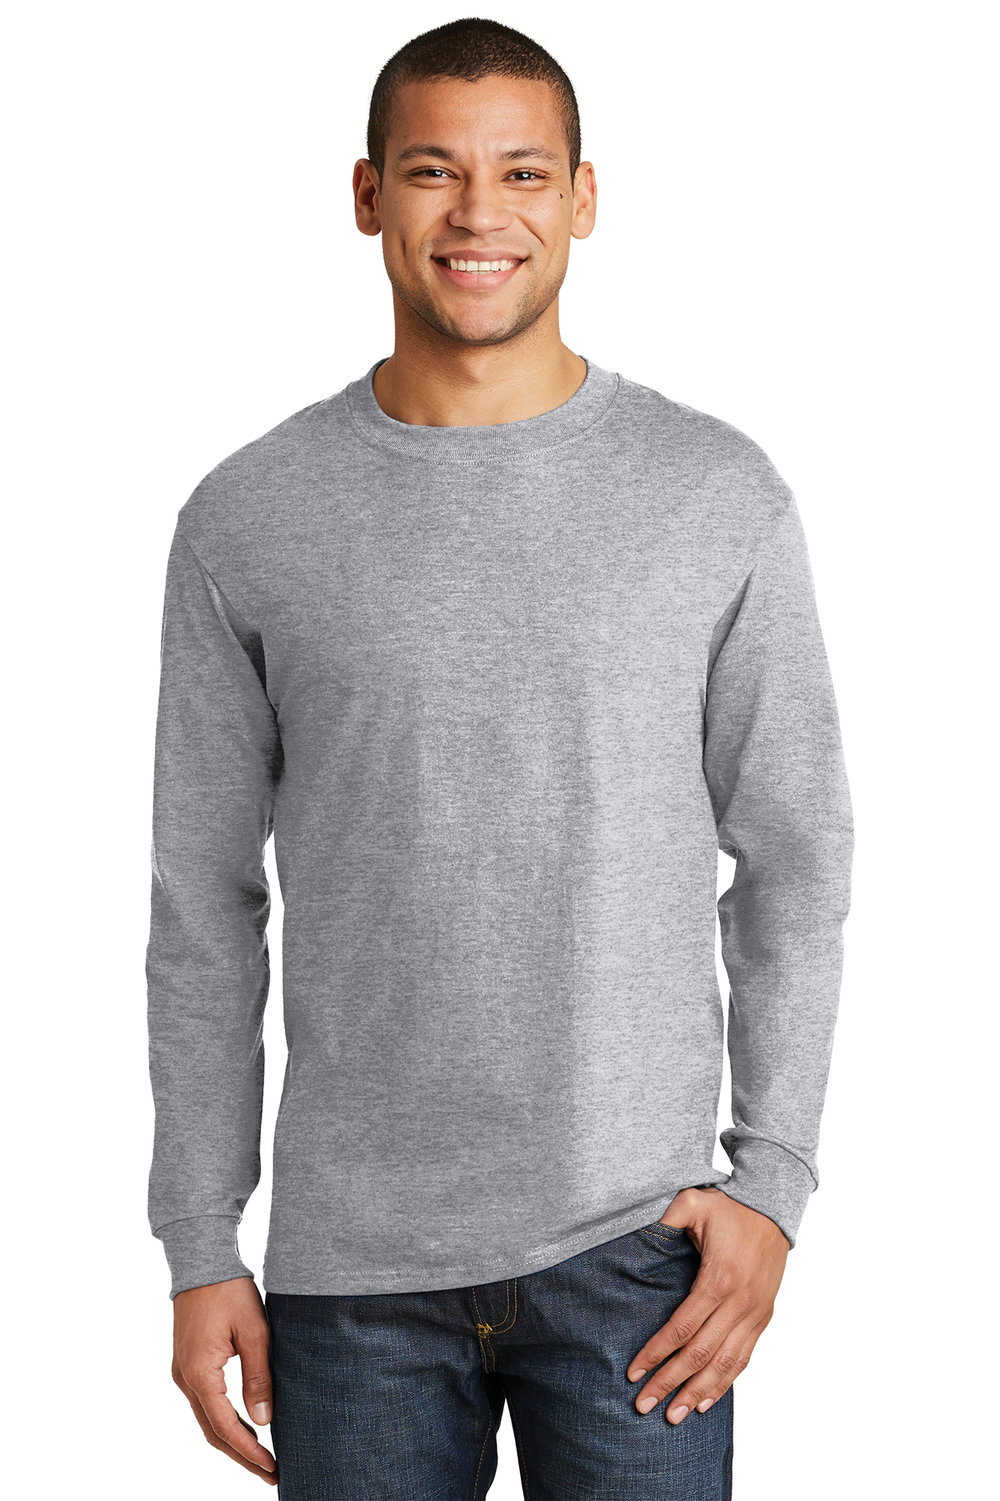 Hanes NEW 100% Cotton Long Sleeve Beefy-T T-Shirt 5186 Mens S-3XL Tee 25 COLORS 